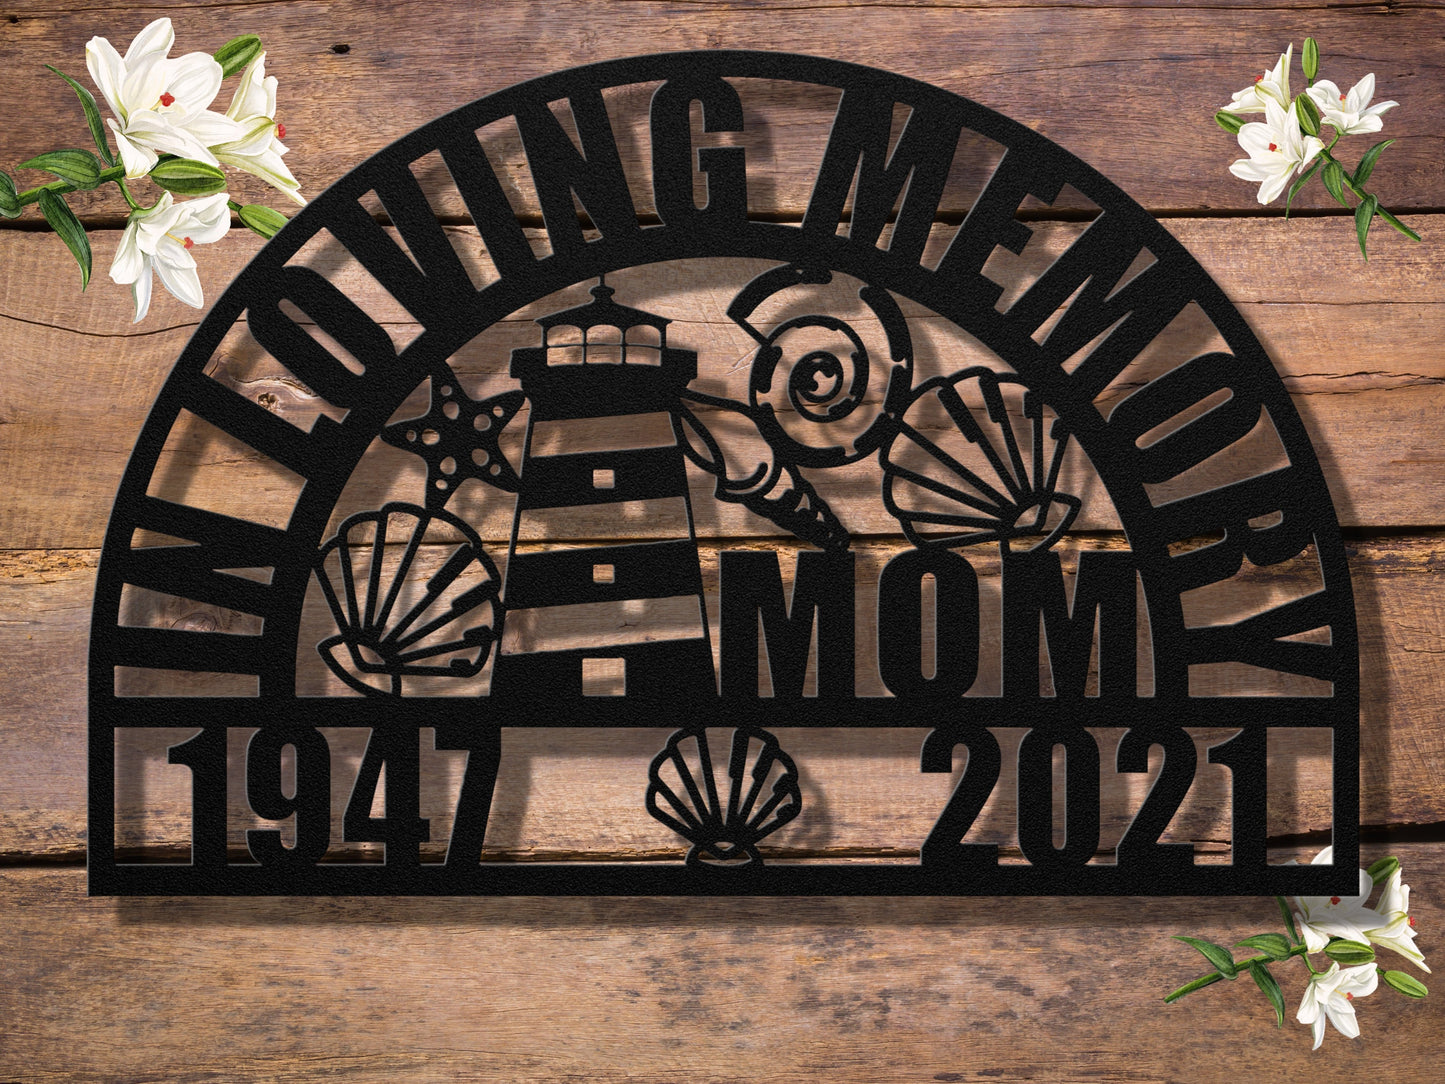 Lighthouse Memorial Metal Sign - Nautical Sympathy Gift for Loss of Mother